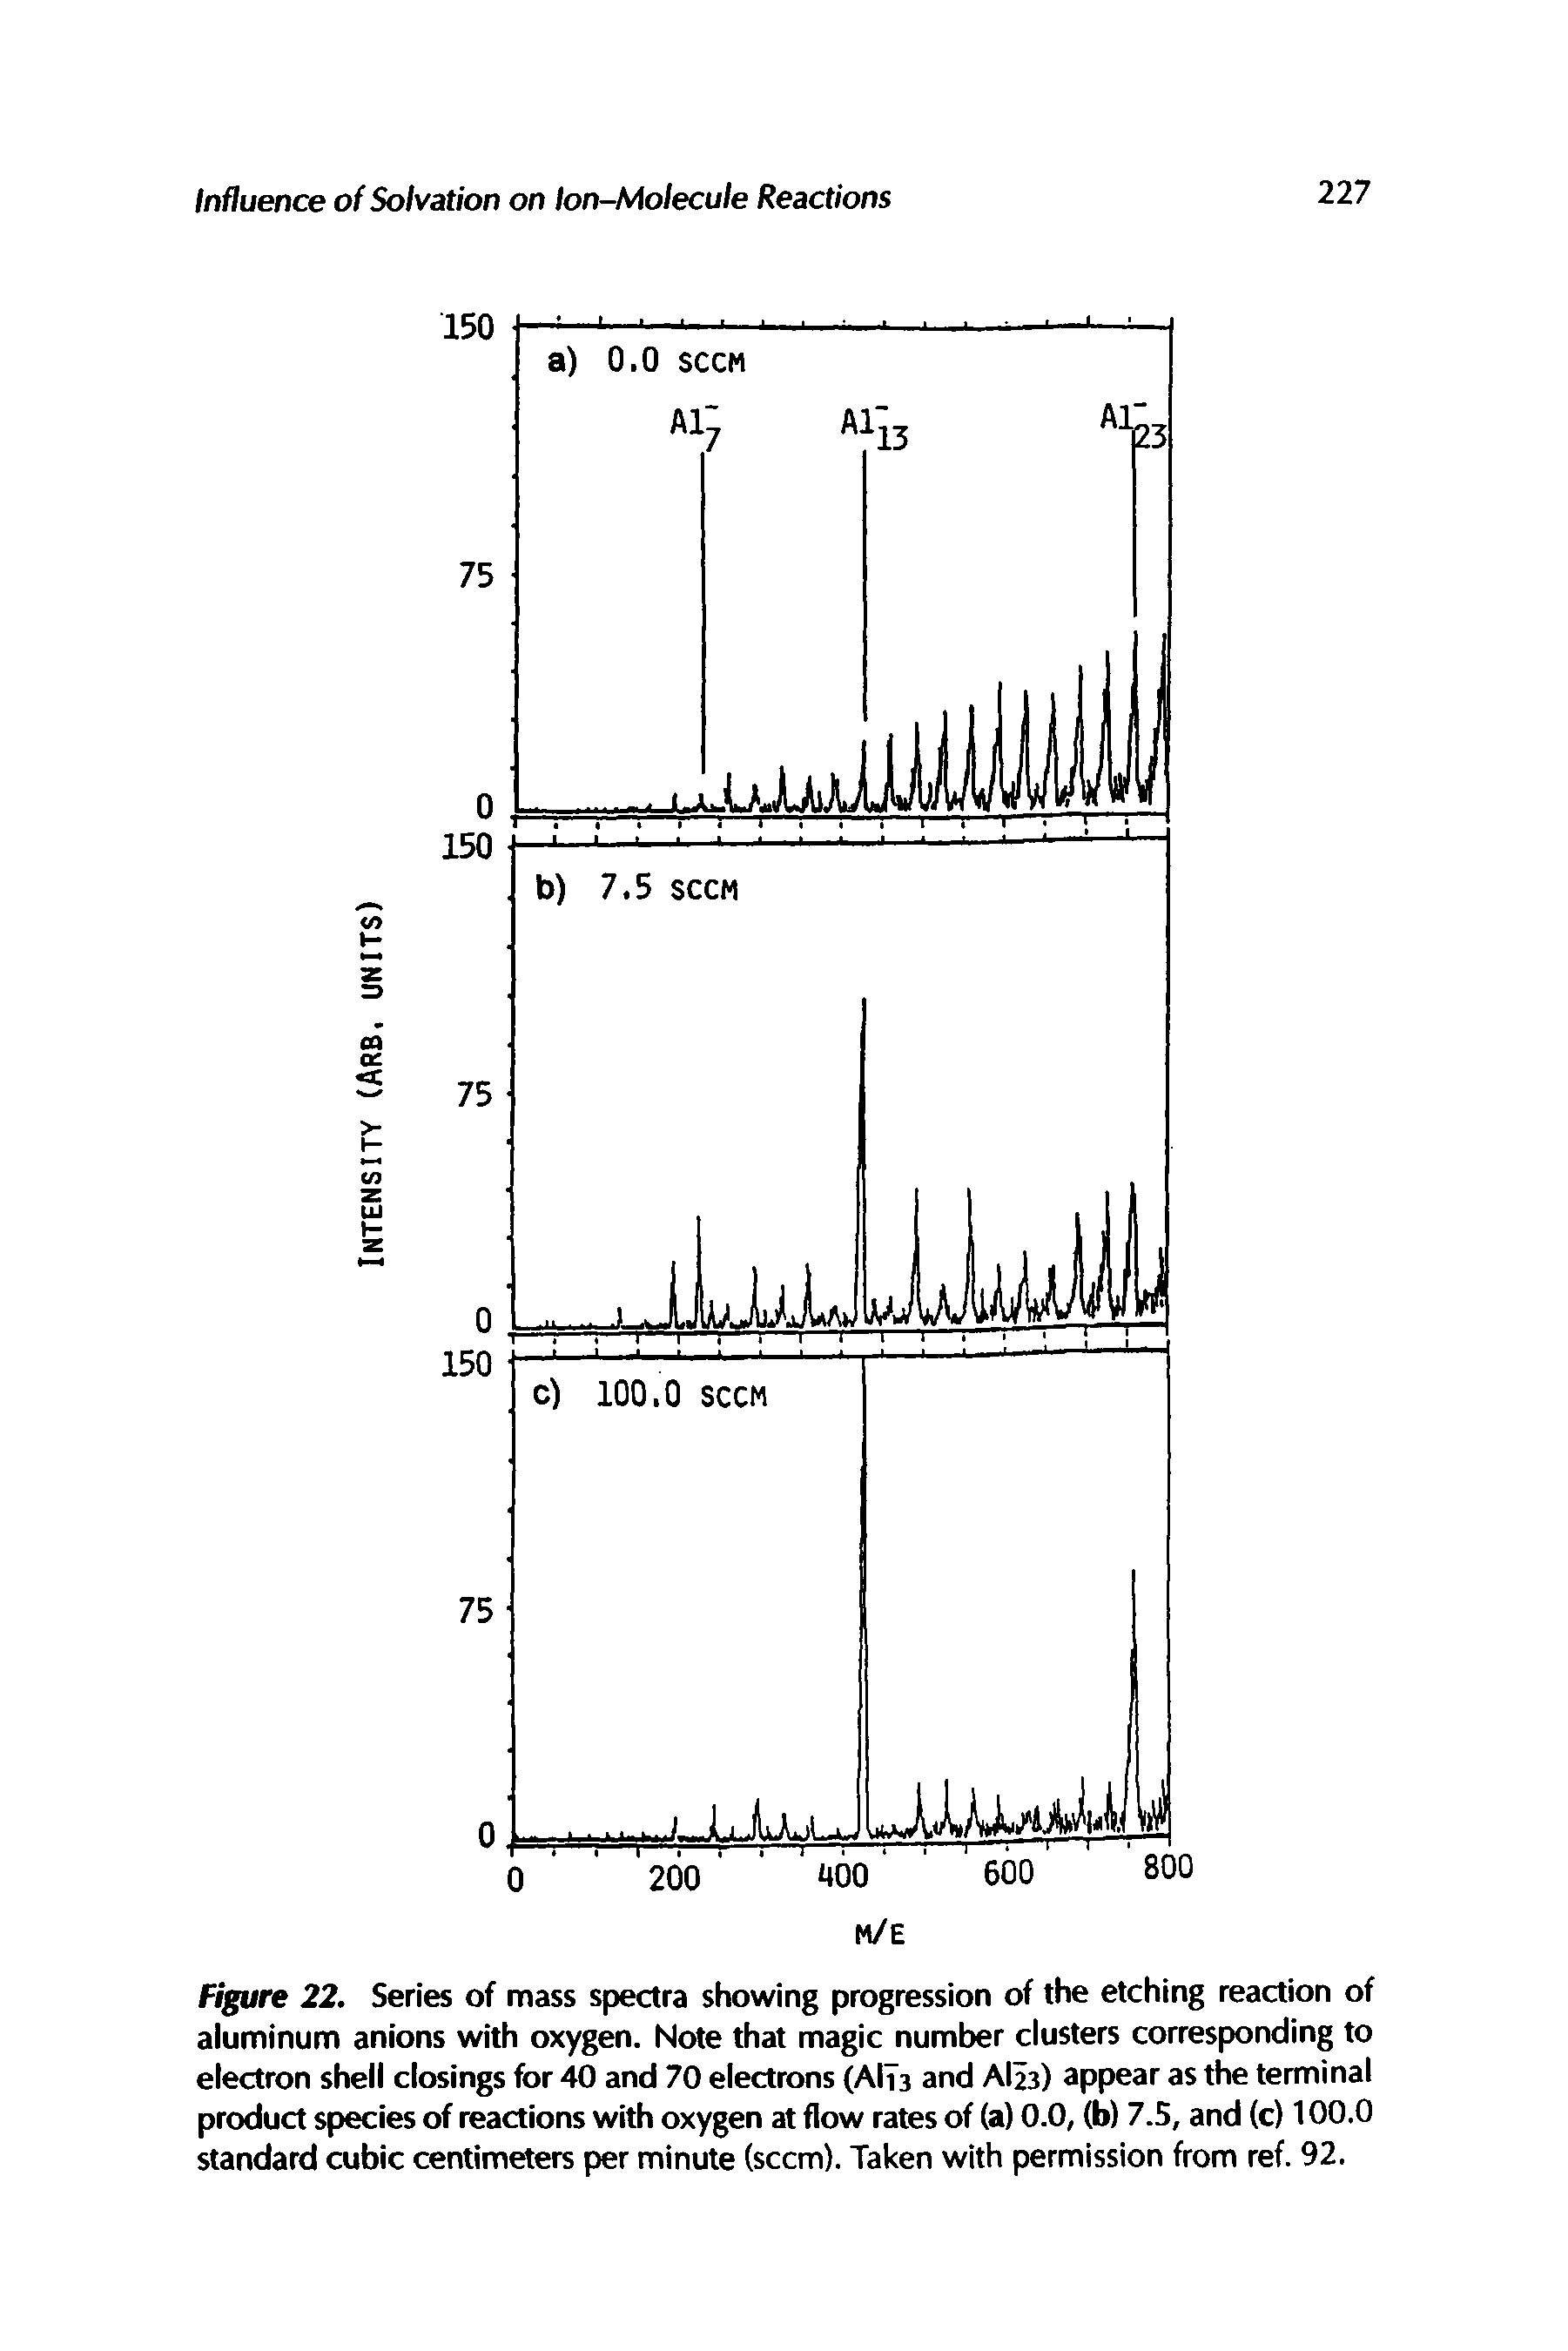 Figure 22. Series of mass spectra showing progression of the etching reaction of aluminum anions with oxygen. Note that magic number clusters corresponding to electron shell closings for 40 and 70 electrons (AI13 and AI23) appear as the terminal product species of reactions with oxygen at flow rates of (a) 0.0, (b) 7.5, and (c) 100.0 standard cubic centimeters per minute (seem). Taken with permission from ref. 92.